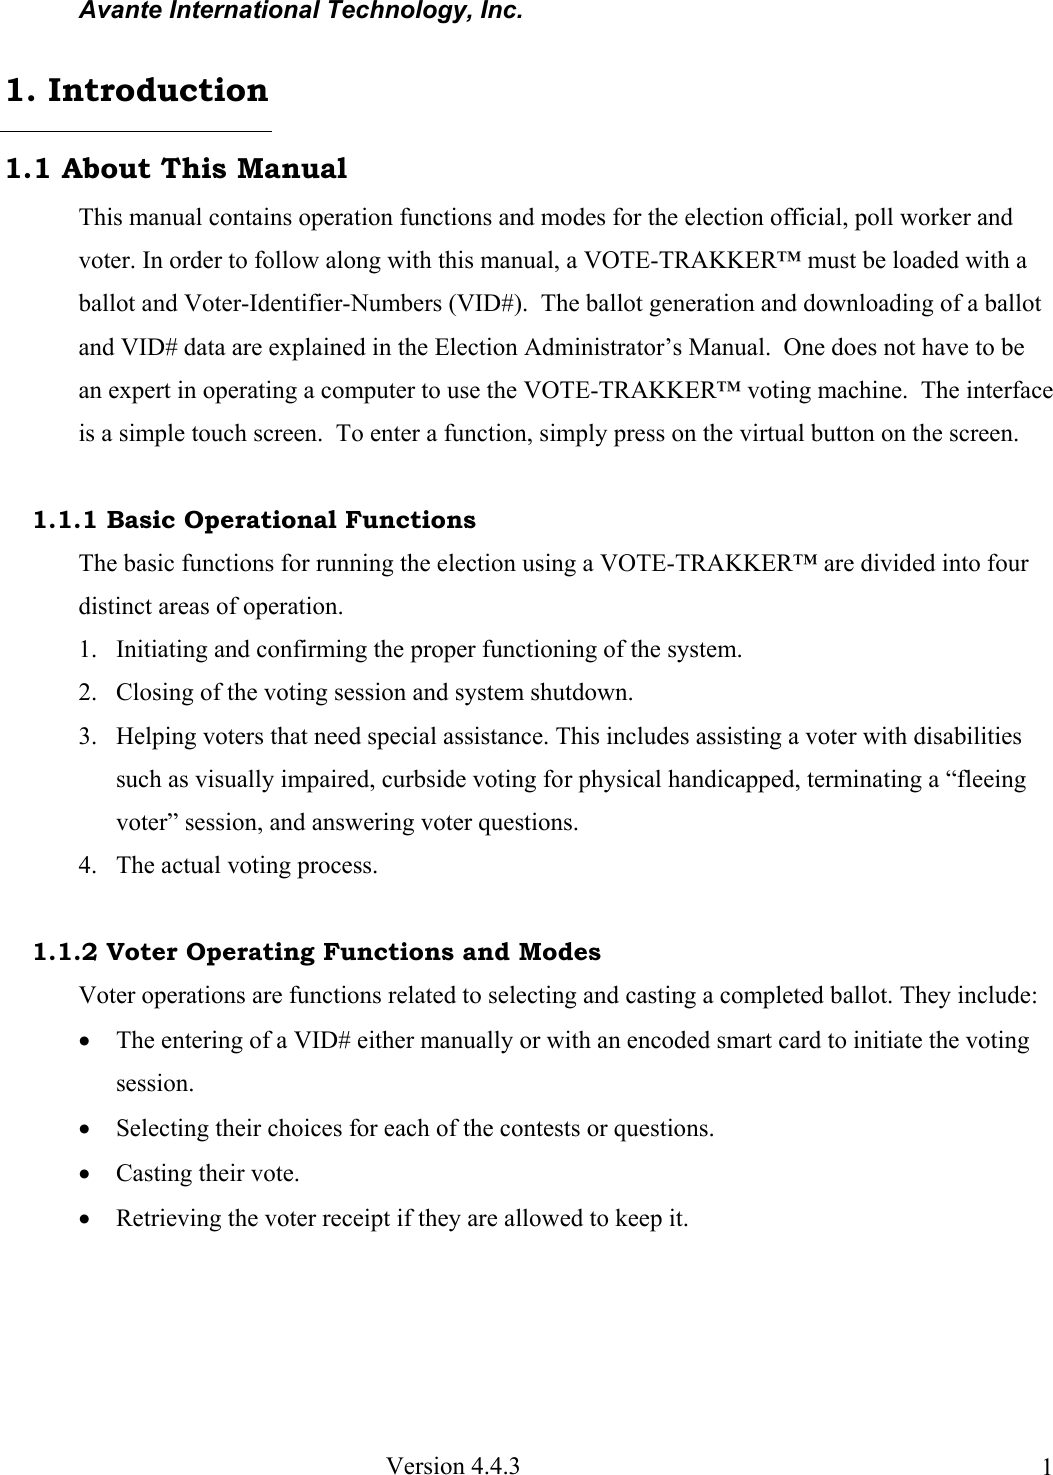 Avante International Technology, Inc.  Version 4.4.3  11.1 About This Manual This manual contains operation functions and modes for the election official, poll worker and voter. In order to follow along with this manual, a VOTE-TRAKKER™ must be loaded with a ballot and Voter-Identifier-Numbers (VID#).  The ballot generation and downloading of a ballot and VID# data are explained in the Election Administrator’s Manual.  One does not have to be an expert in operating a computer to use the VOTE-TRAKKER™ voting machine.  The interface is a simple touch screen.  To enter a function, simply press on the virtual button on the screen.    1.1.1 Basic Operational Functions The basic functions for running the election using a VOTE-TRAKKER™ are divided into four distinct areas of operation.  1. Initiating and confirming the proper functioning of the system. 2. Closing of the voting session and system shutdown.   3. Helping voters that need special assistance. This includes assisting a voter with disabilities such as visually impaired, curbside voting for physical handicapped, terminating a “fleeing voter” session, and answering voter questions.   4. The actual voting process.  1.1.2 Voter Operating Functions and Modes Voter operations are functions related to selecting and casting a completed ballot. They include: • The entering of a VID# either manually or with an encoded smart card to initiate the voting session.  • Selecting their choices for each of the contests or questions. • Casting their vote. • Retrieving the voter receipt if they are allowed to keep it.    1. Introduction 